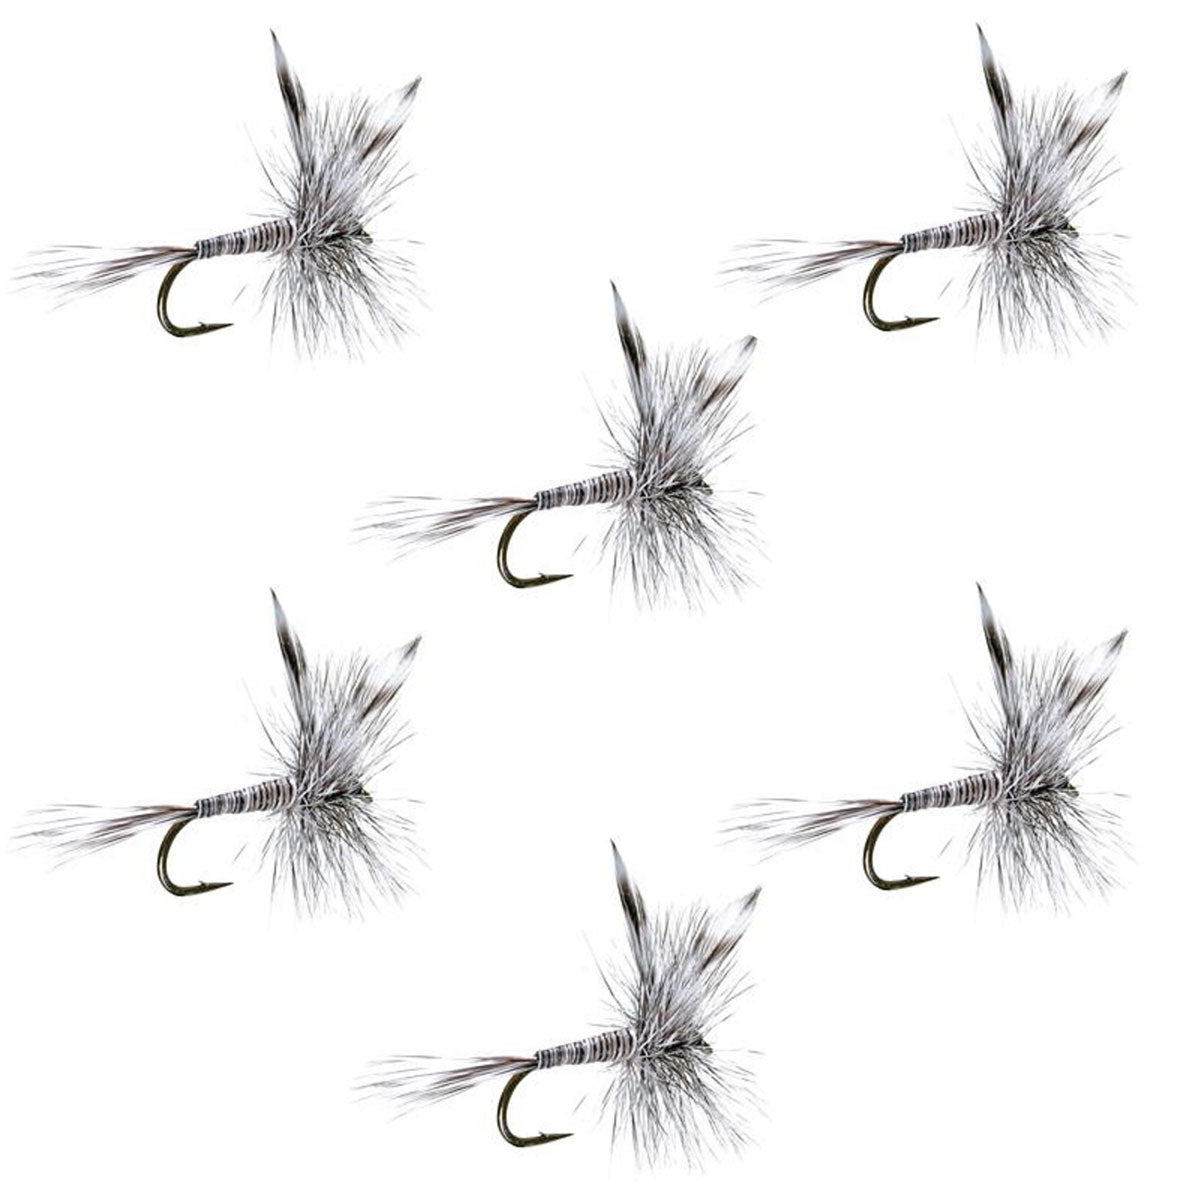 Mosquito Classic Trout Dry Fly Fishing Flies - Set of 6 Flies Size 14